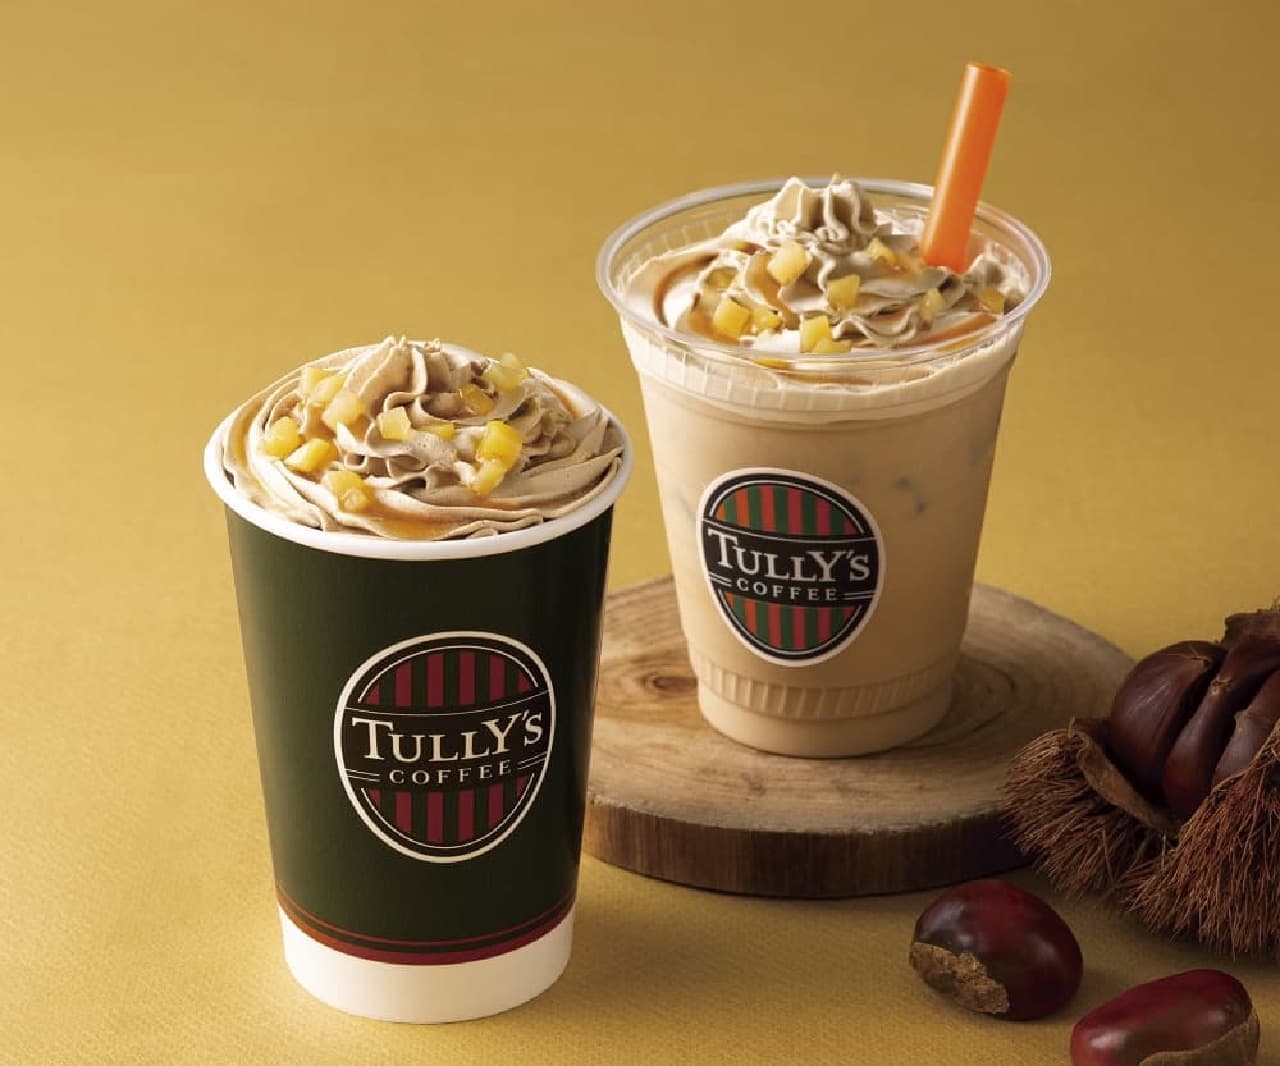 Tully's Coffee "Japanese Chestnut Mont Blanc Latte" and "Japanese Chestnut Mont Blanc Green Tea Shake